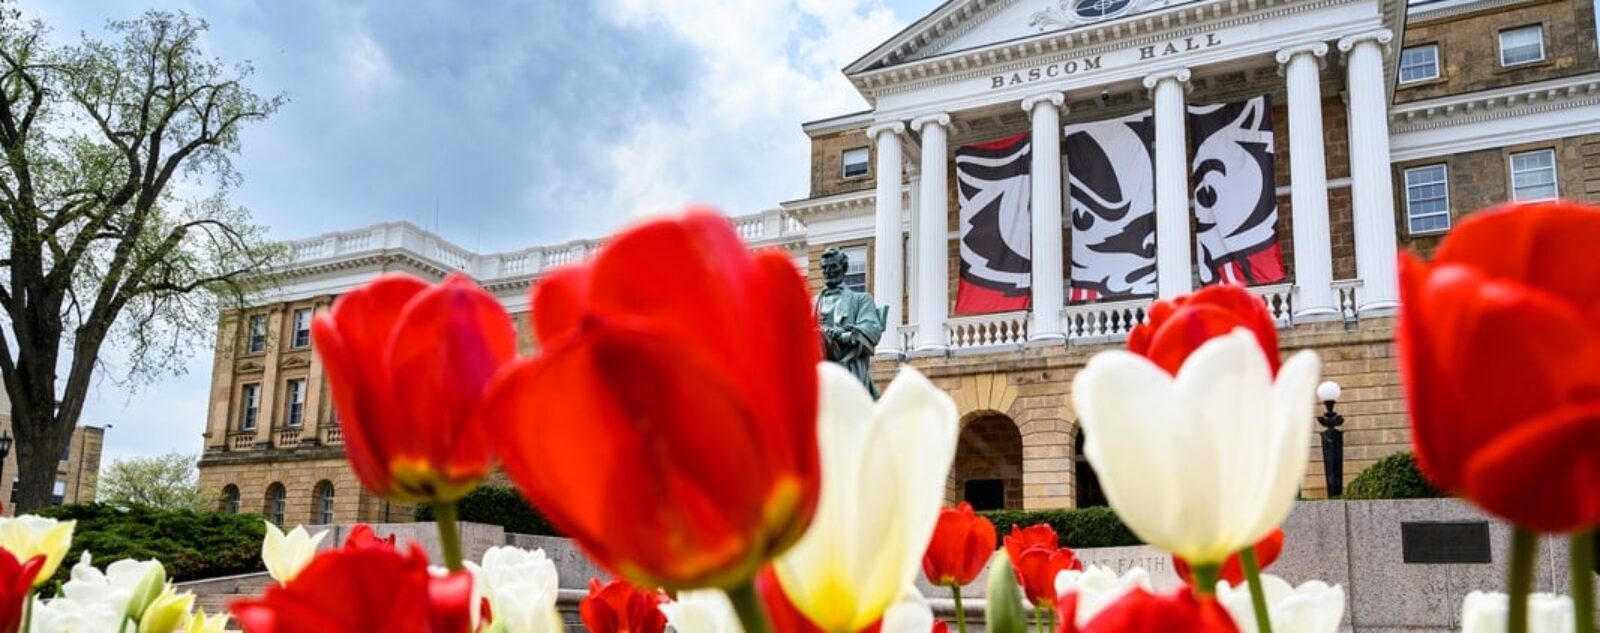 Red and white tulips in front of Bascom Hall